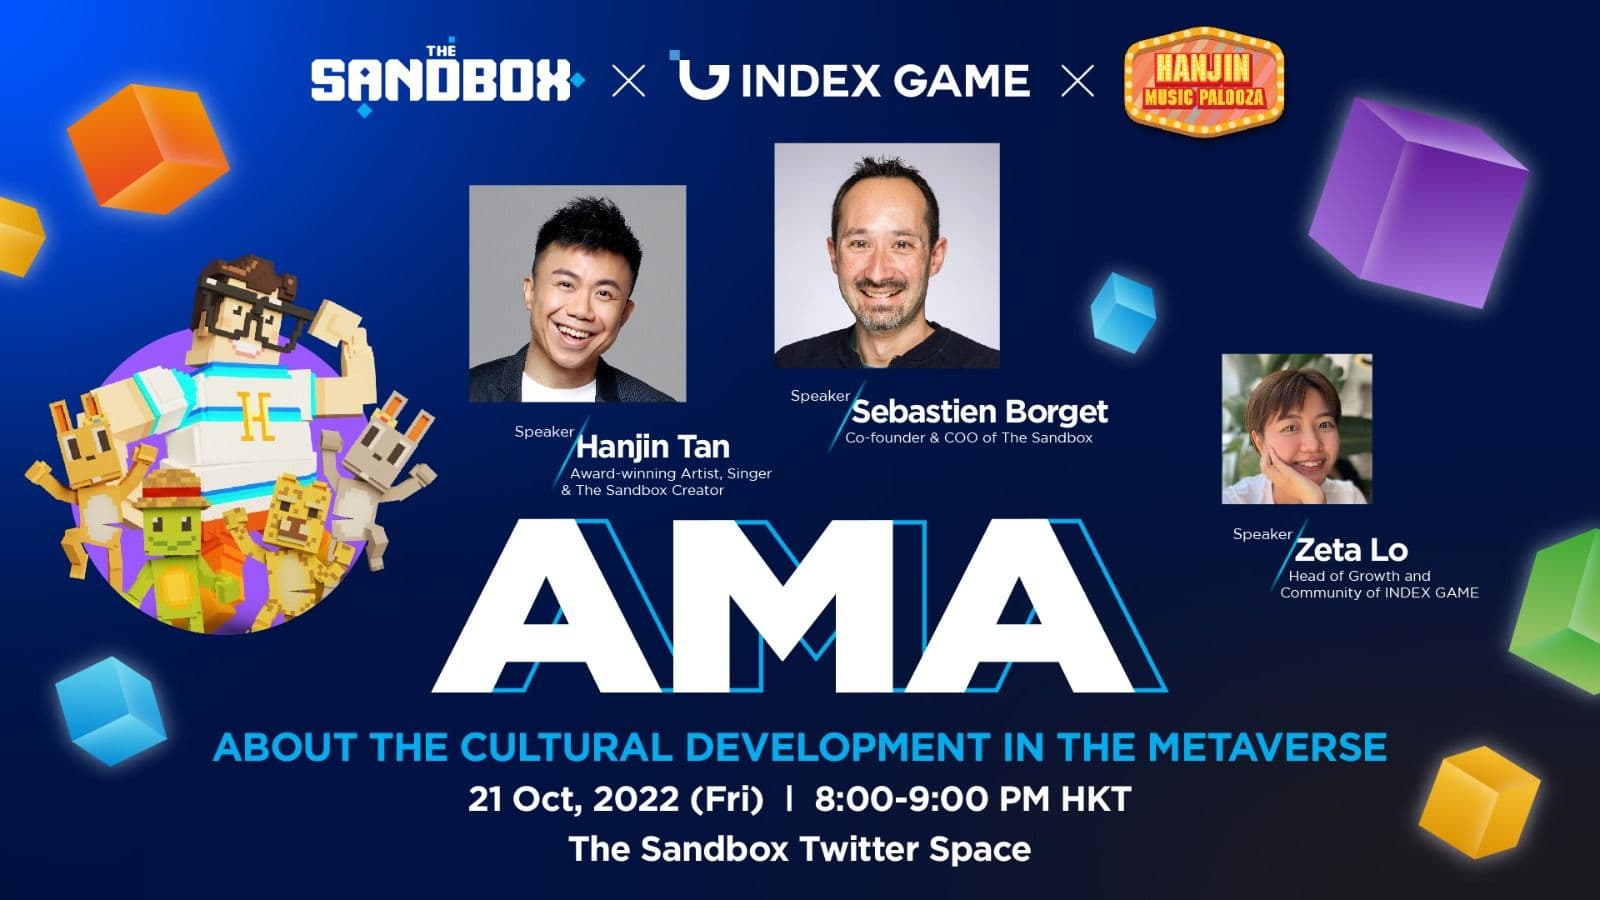 have u guys played my sandbox game? 
see u guys at the AMA in 1.5 hrs on twitter! 
sebastien is the man!  lol 
me and seb gonna chat abt the metaverse and music! 
